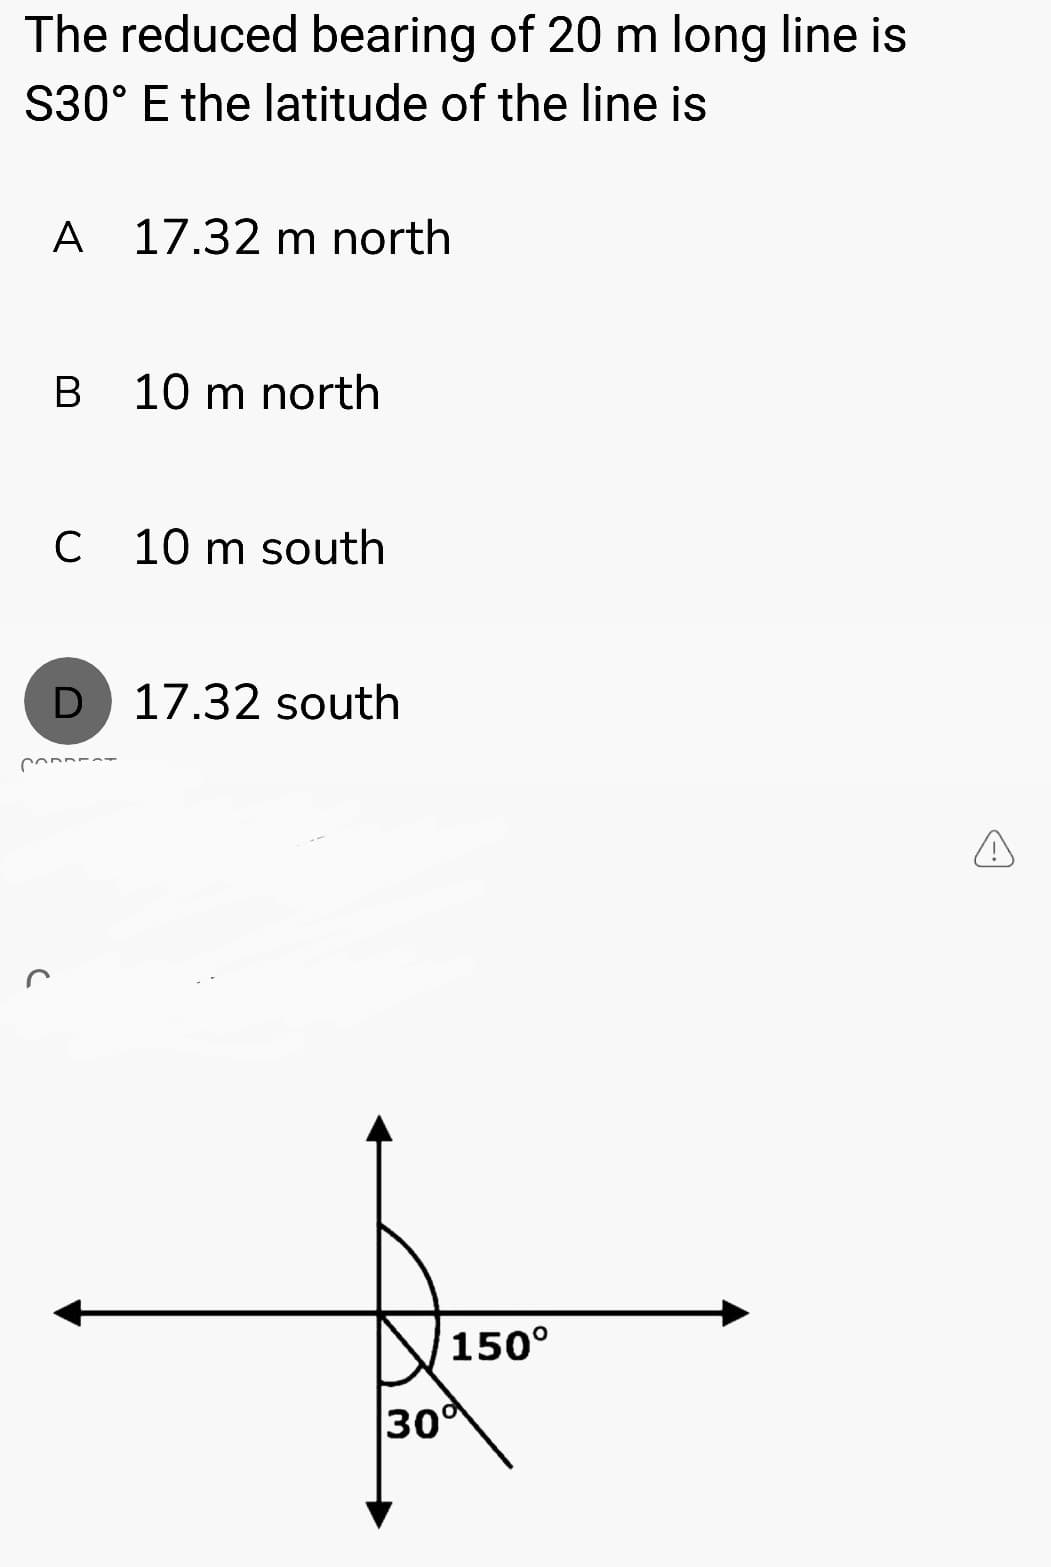 The reduced bearing of 20 m long line is
S30° E the latitude of the line is
A 17.32 m north
C
B
10 m north
C 10 m south
(1)
D 17.32 south
150°
30°